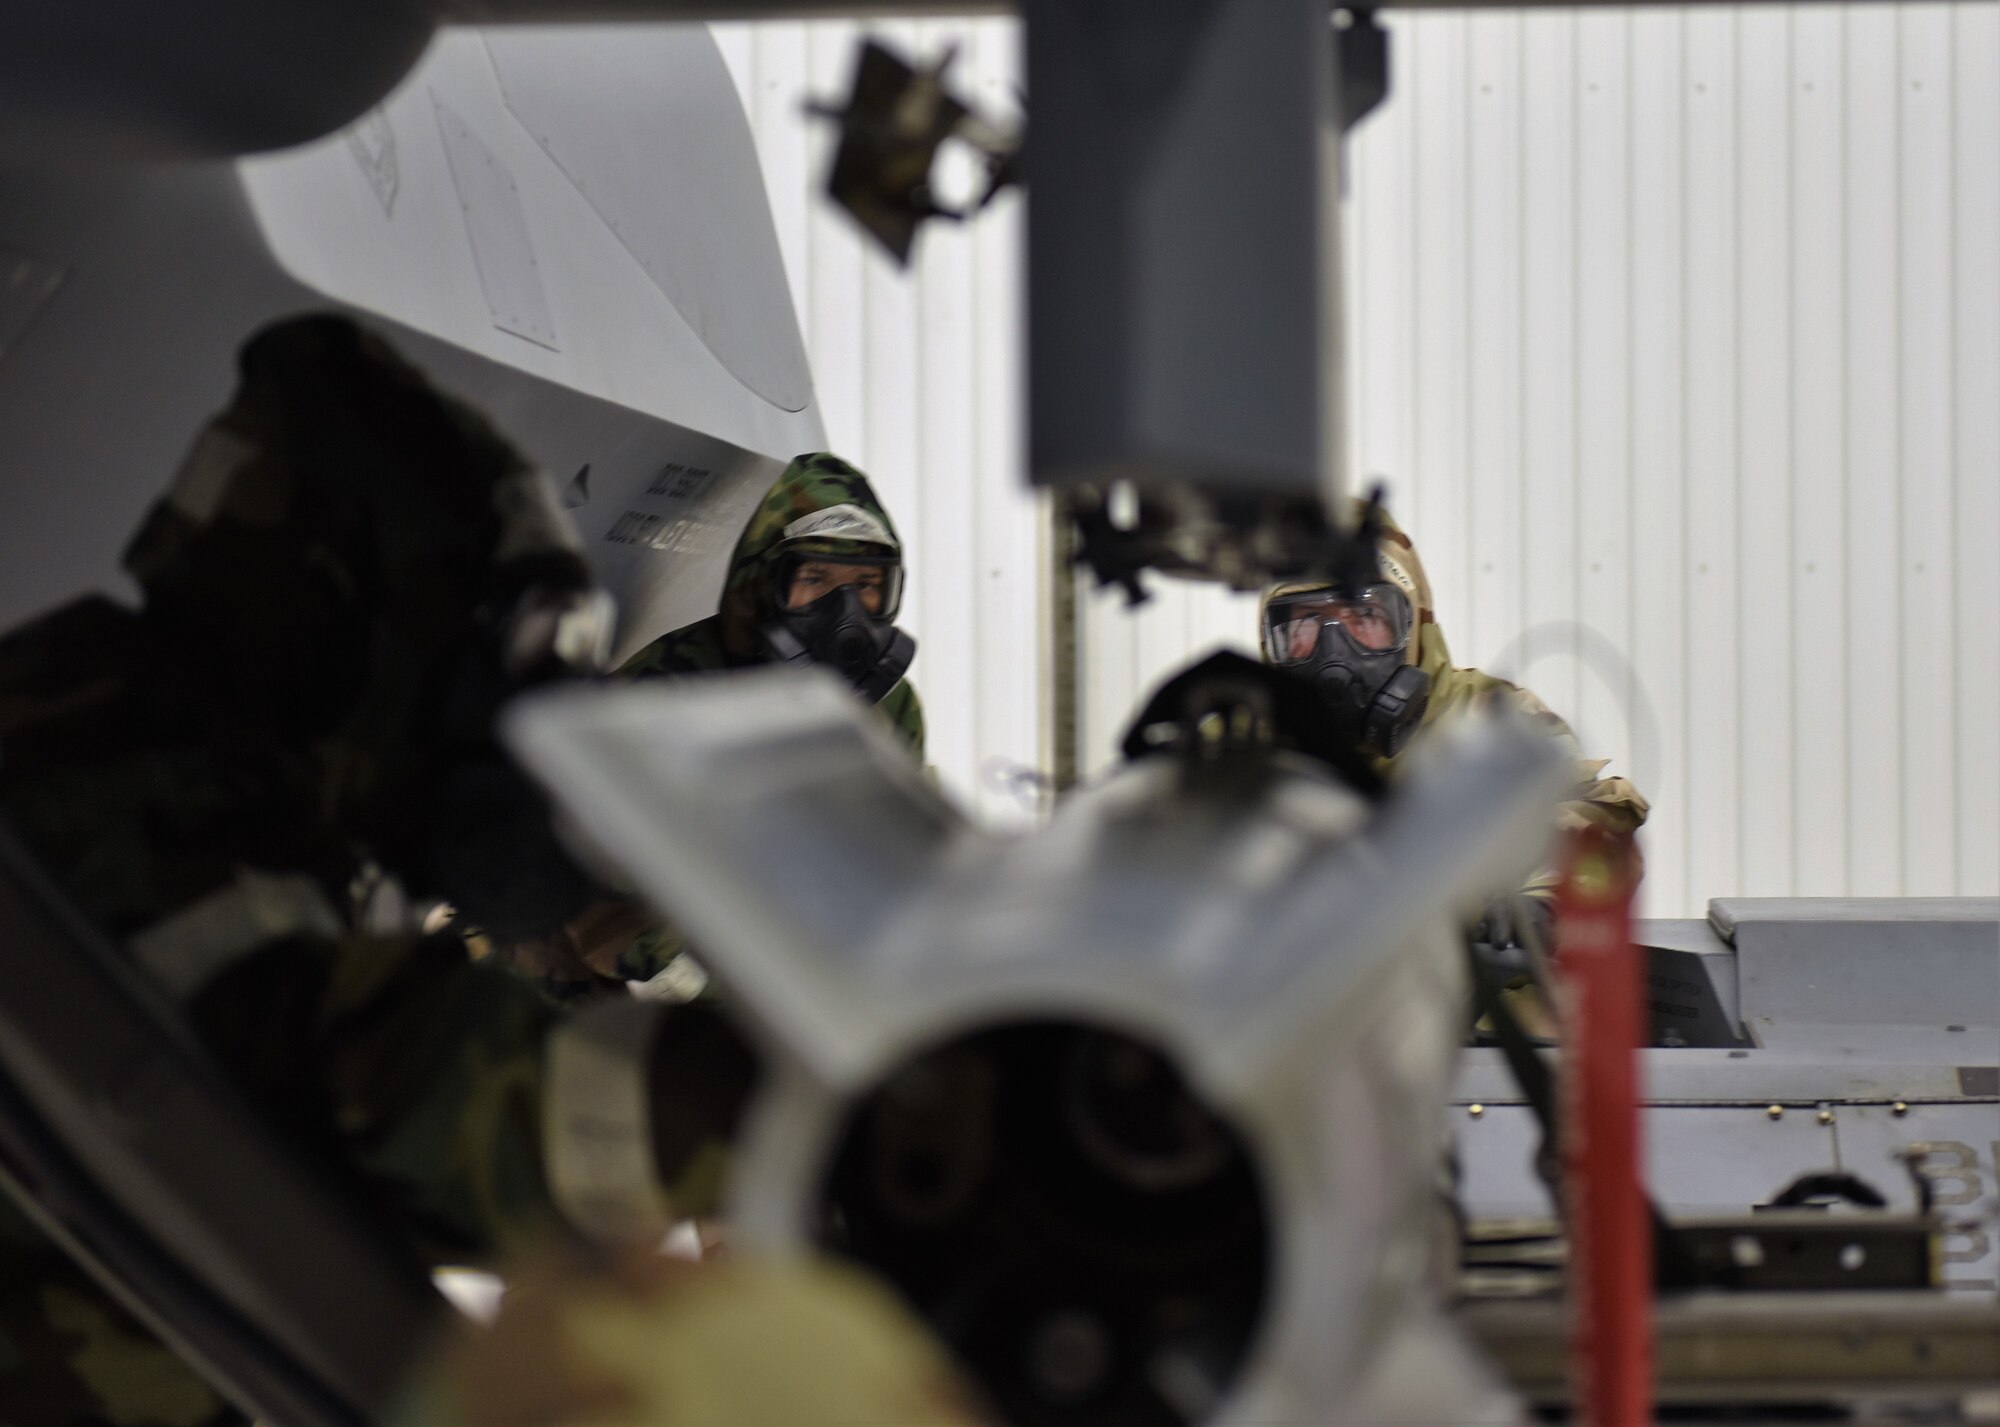 Airmen from the 49th Maintenance Group load weapons onto a MQ-9 Reaper during a phase II exercise at Holloman Air Force Base, N.M., Feb. 22, 2018. This exercise is a first among remotely piloted aircraft bases and the 49th MXG reached out Osan Air Base for support. (U.S. Air Force photo by Staff Sgt. Timothy Young)